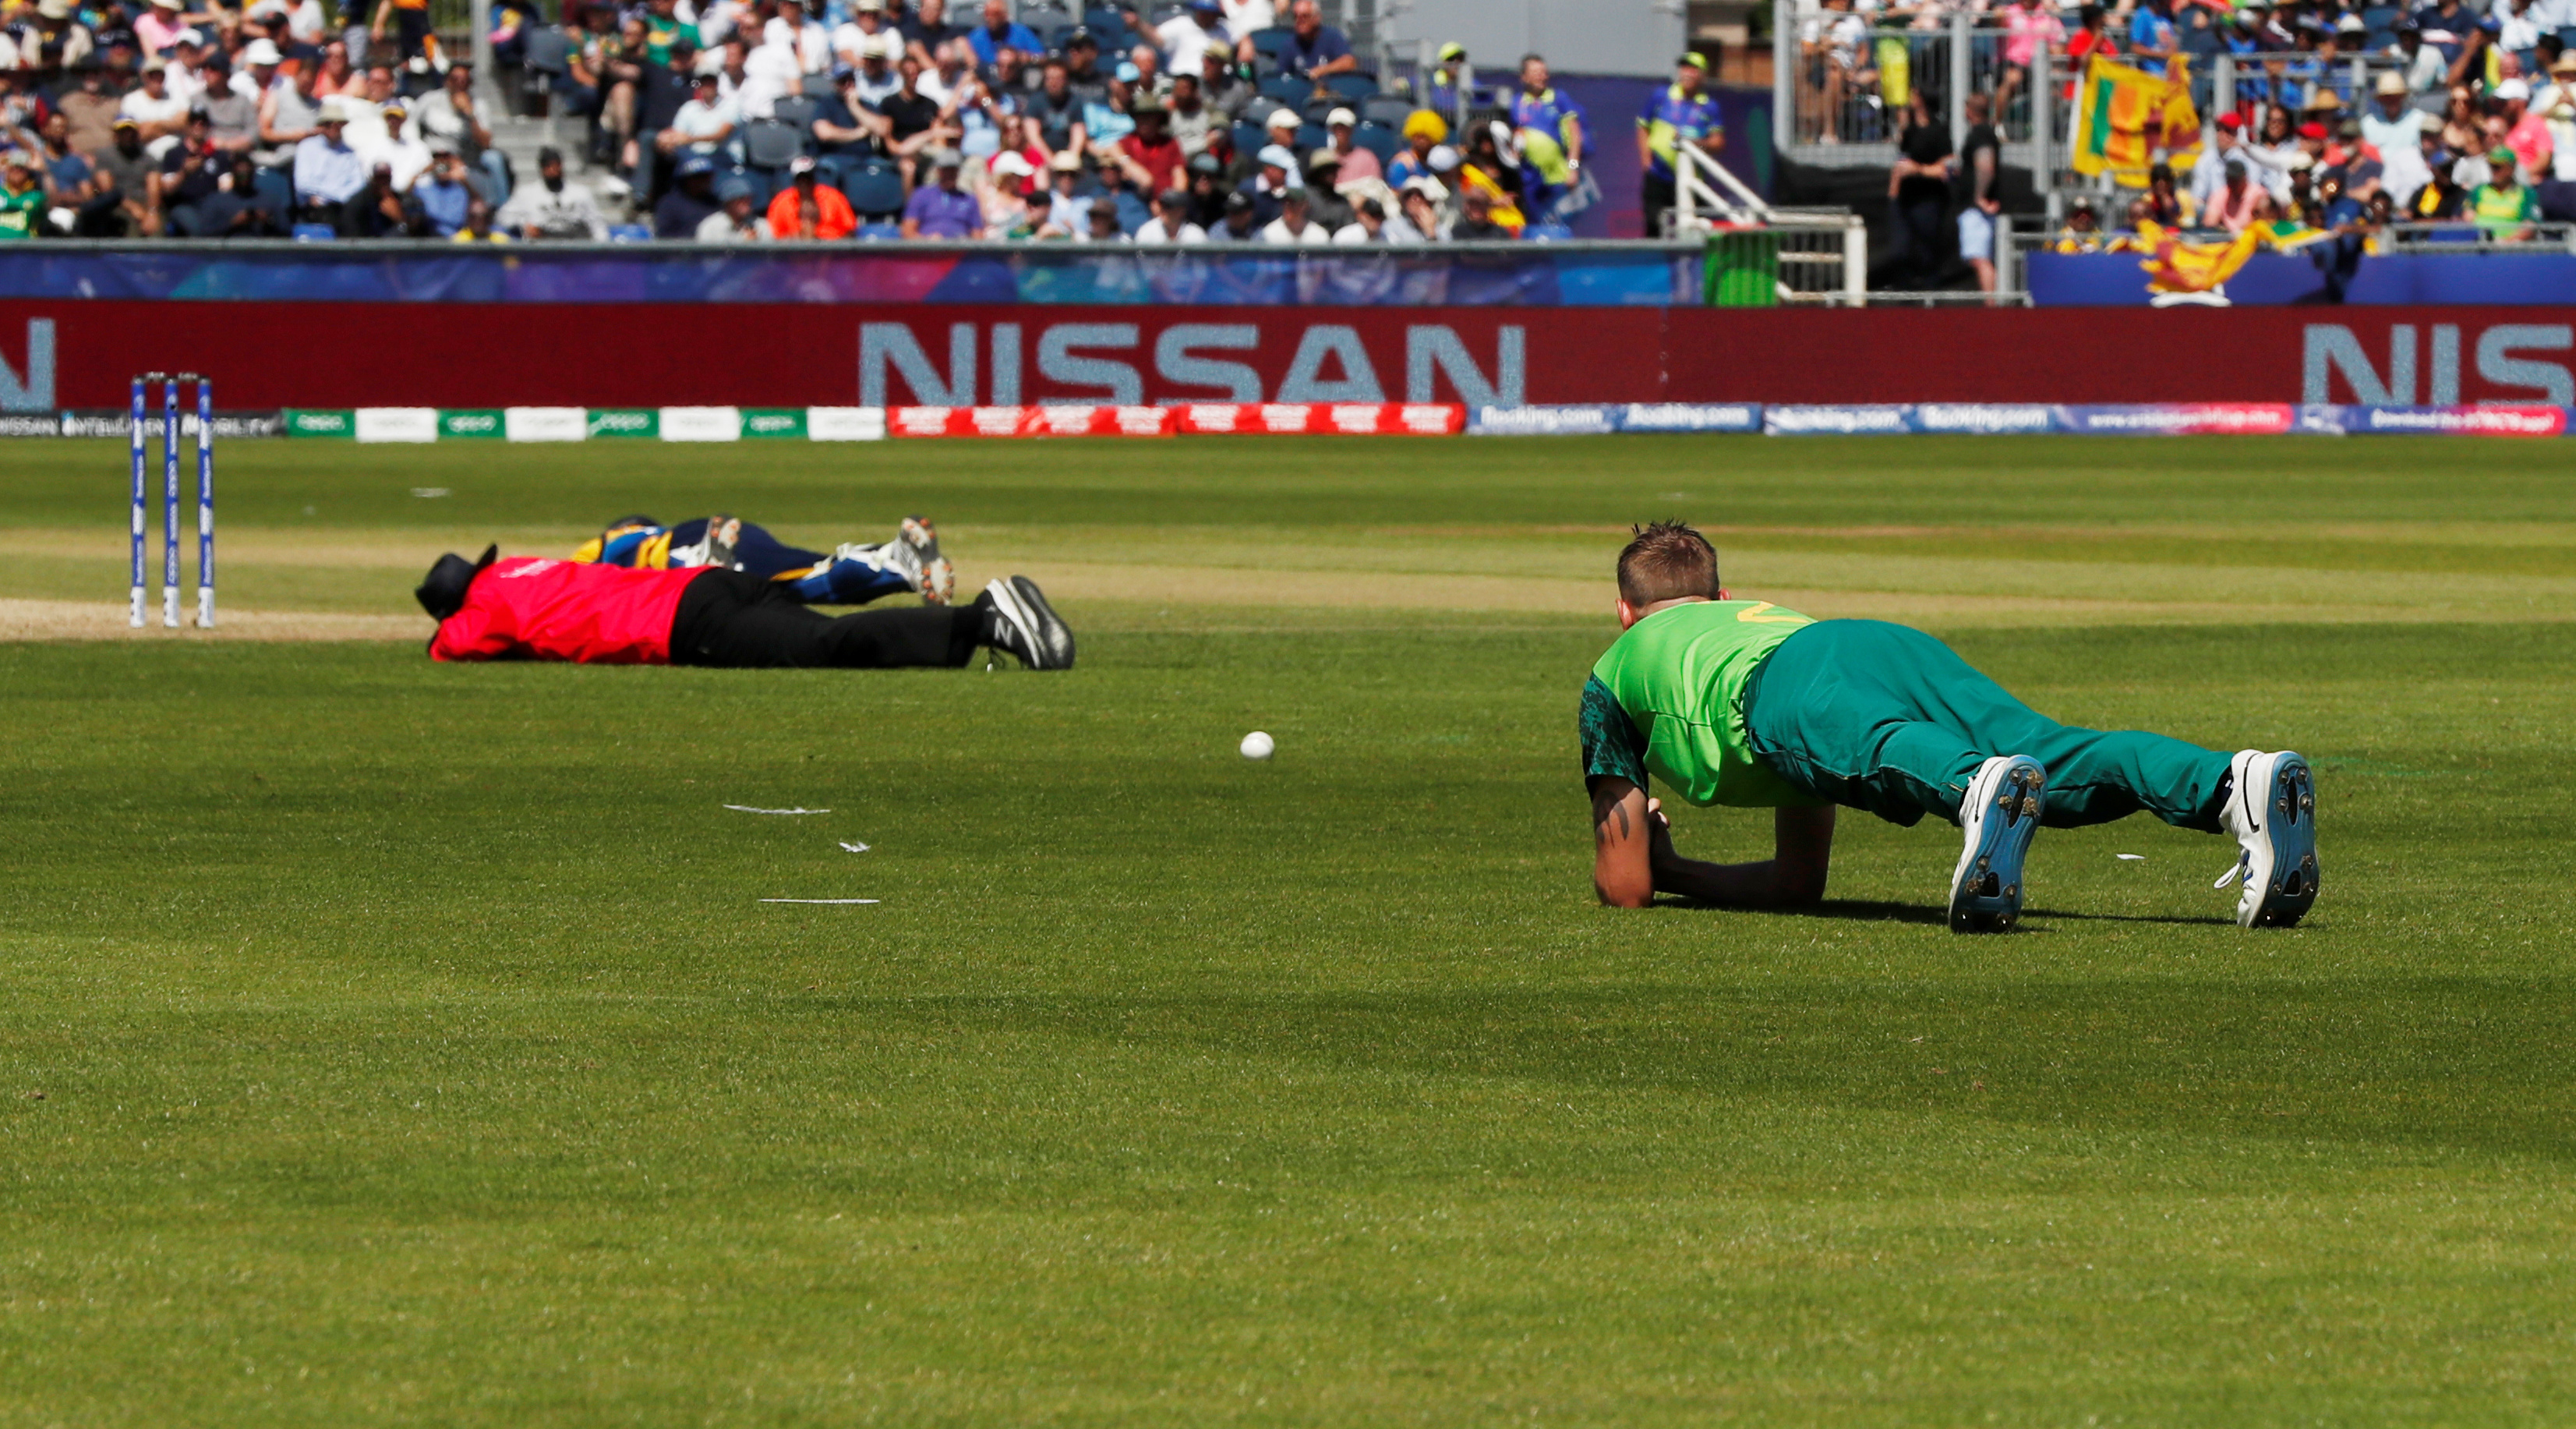 Players and the umpire lie on the ground to avoid bees. Photo: Action Images via Reuters